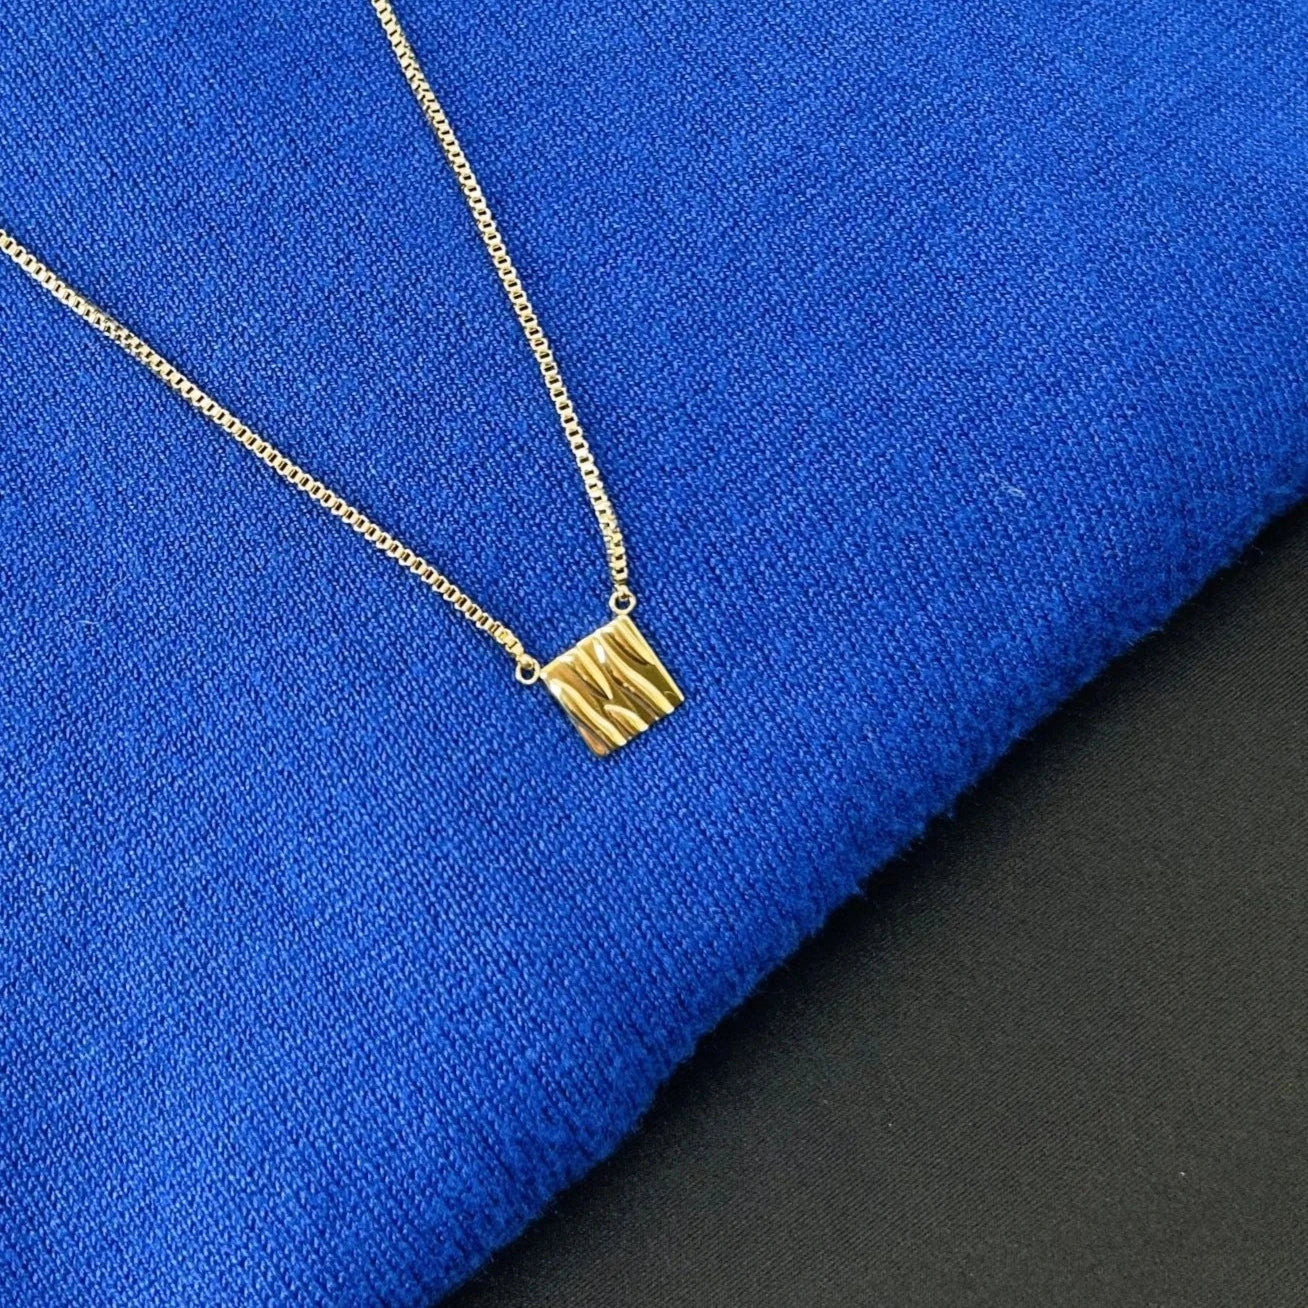 Shining gold pendant necklace standing out beautifully on royal blue